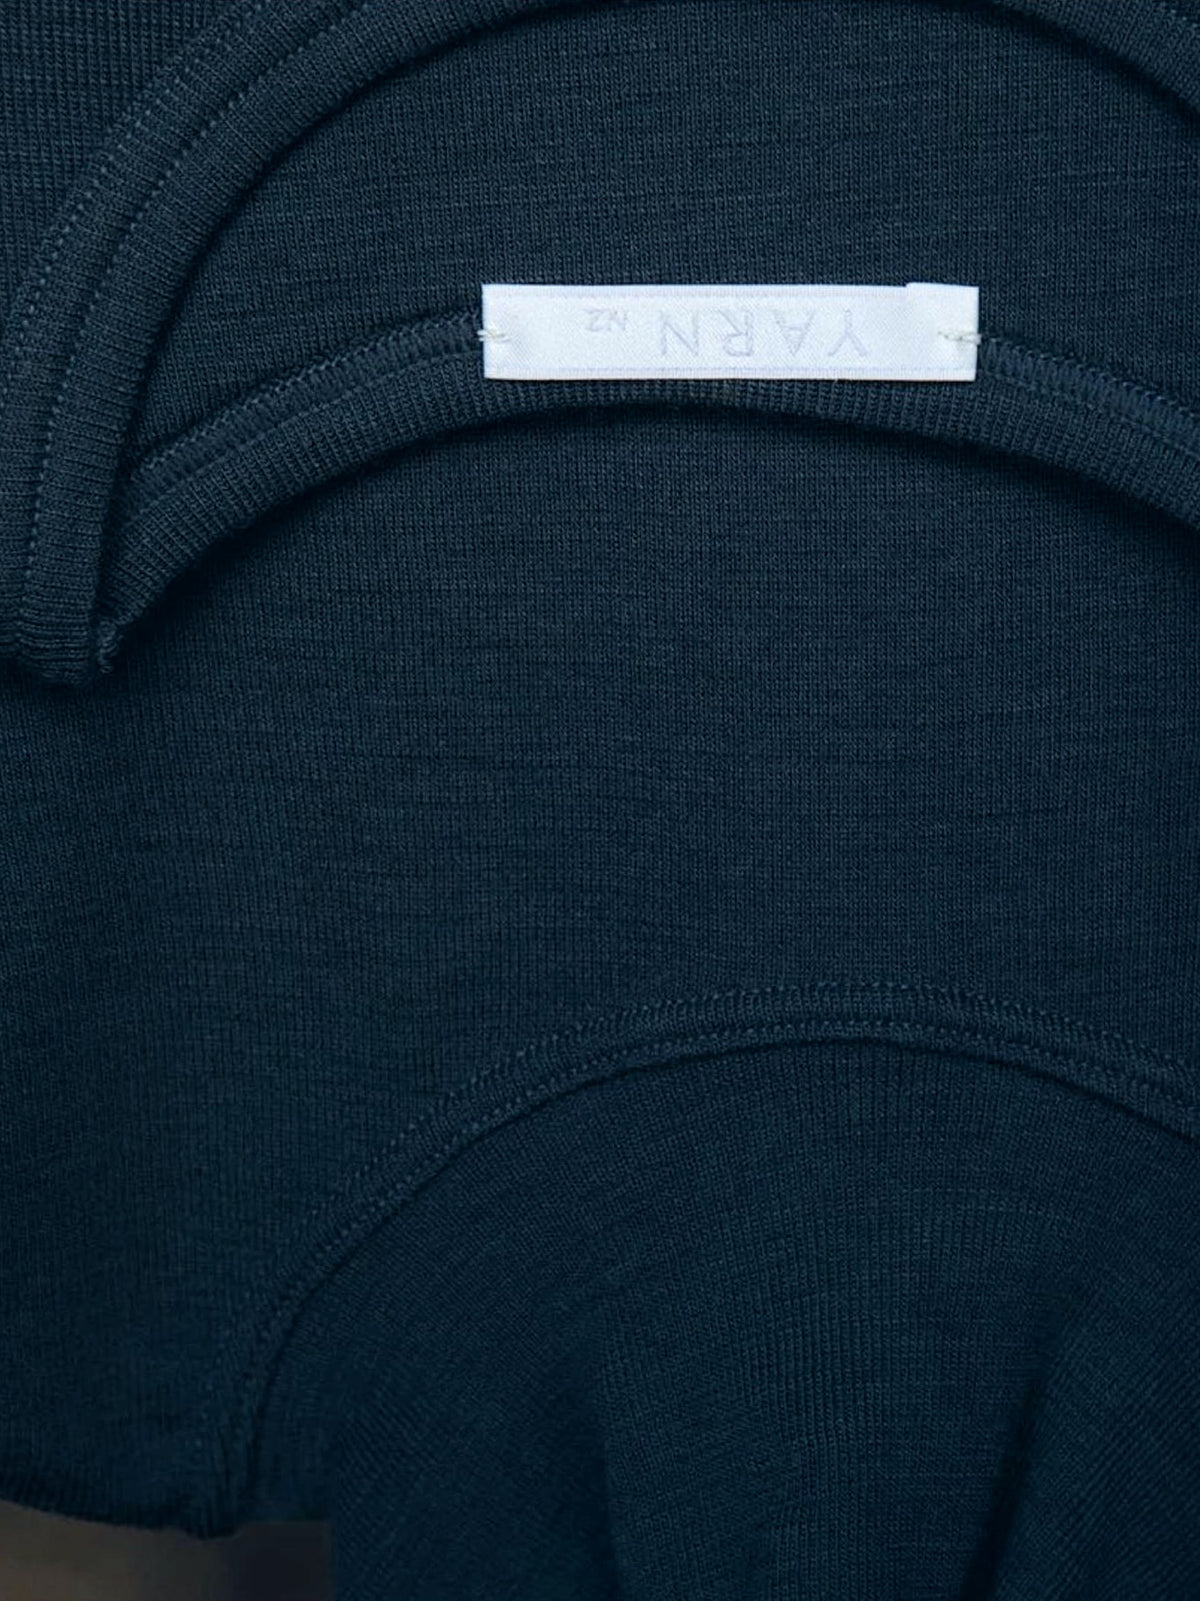 The back of a Tui Fine Merino Rib Turtle - Black sweater with a YARN nz label on it.